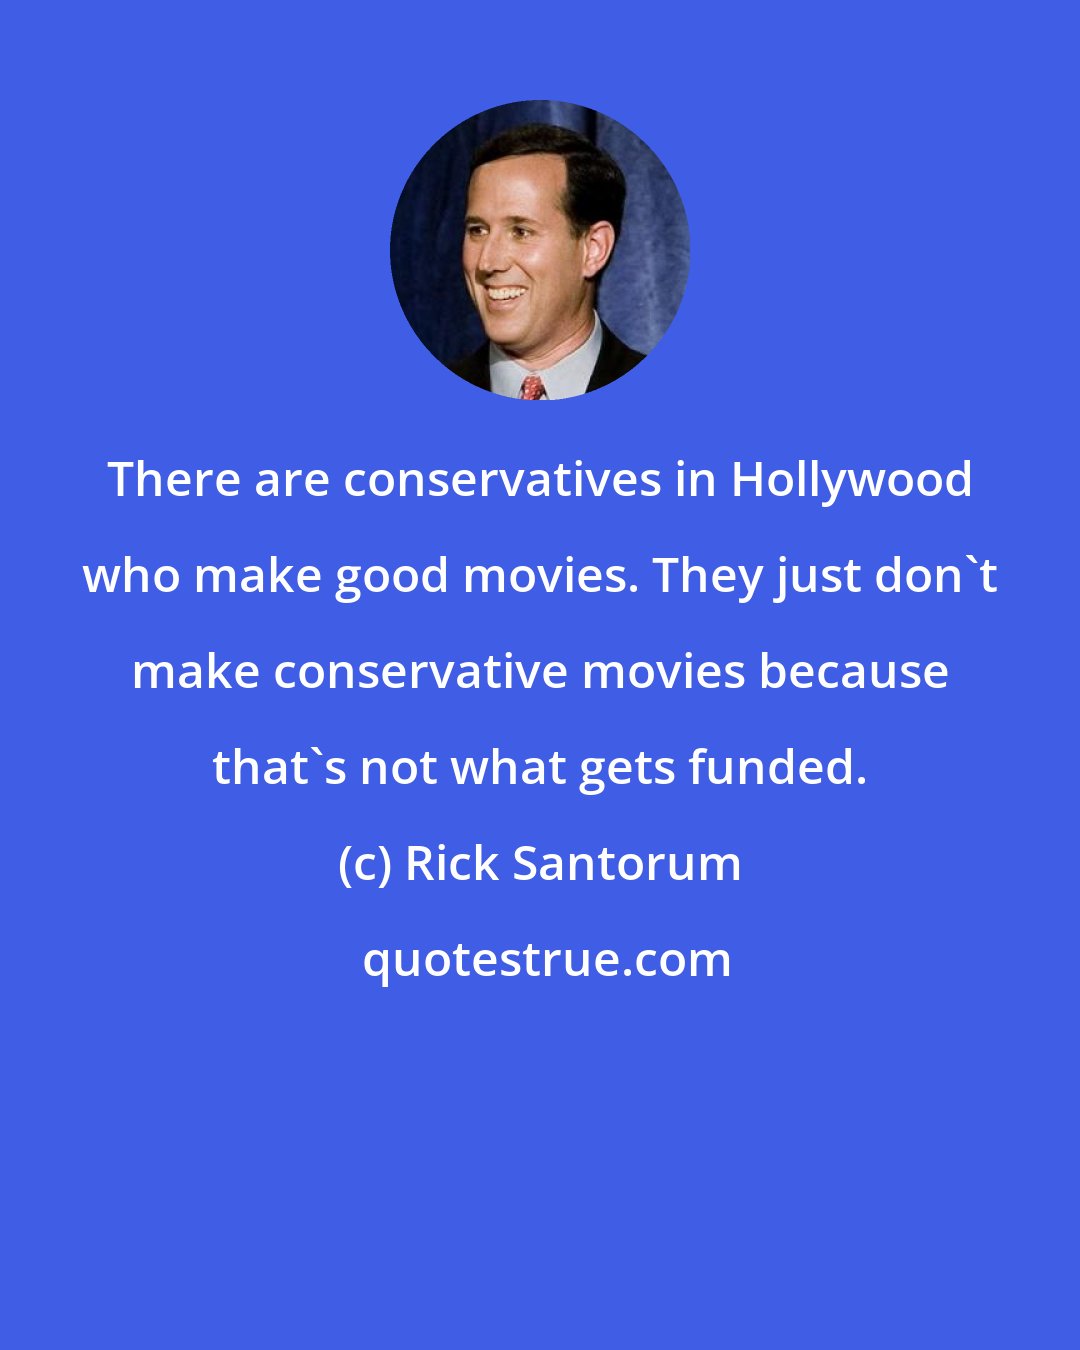 Rick Santorum: There are conservatives in Hollywood who make good movies. They just don't make conservative movies because that's not what gets funded.